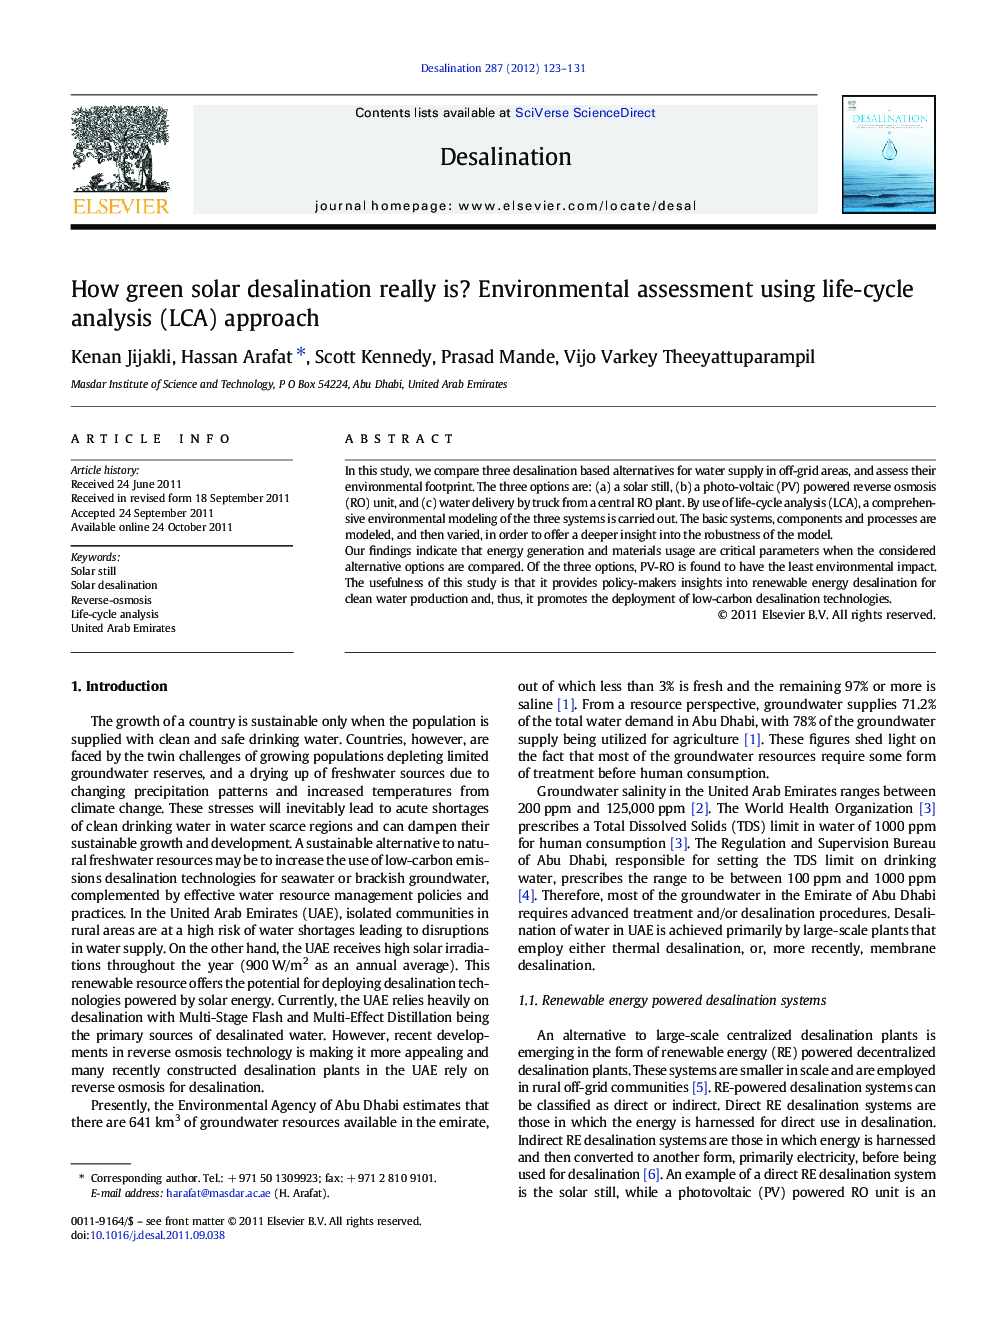 How green solar desalination really is? Environmental assessment using life-cycle analysis (LCA) approach